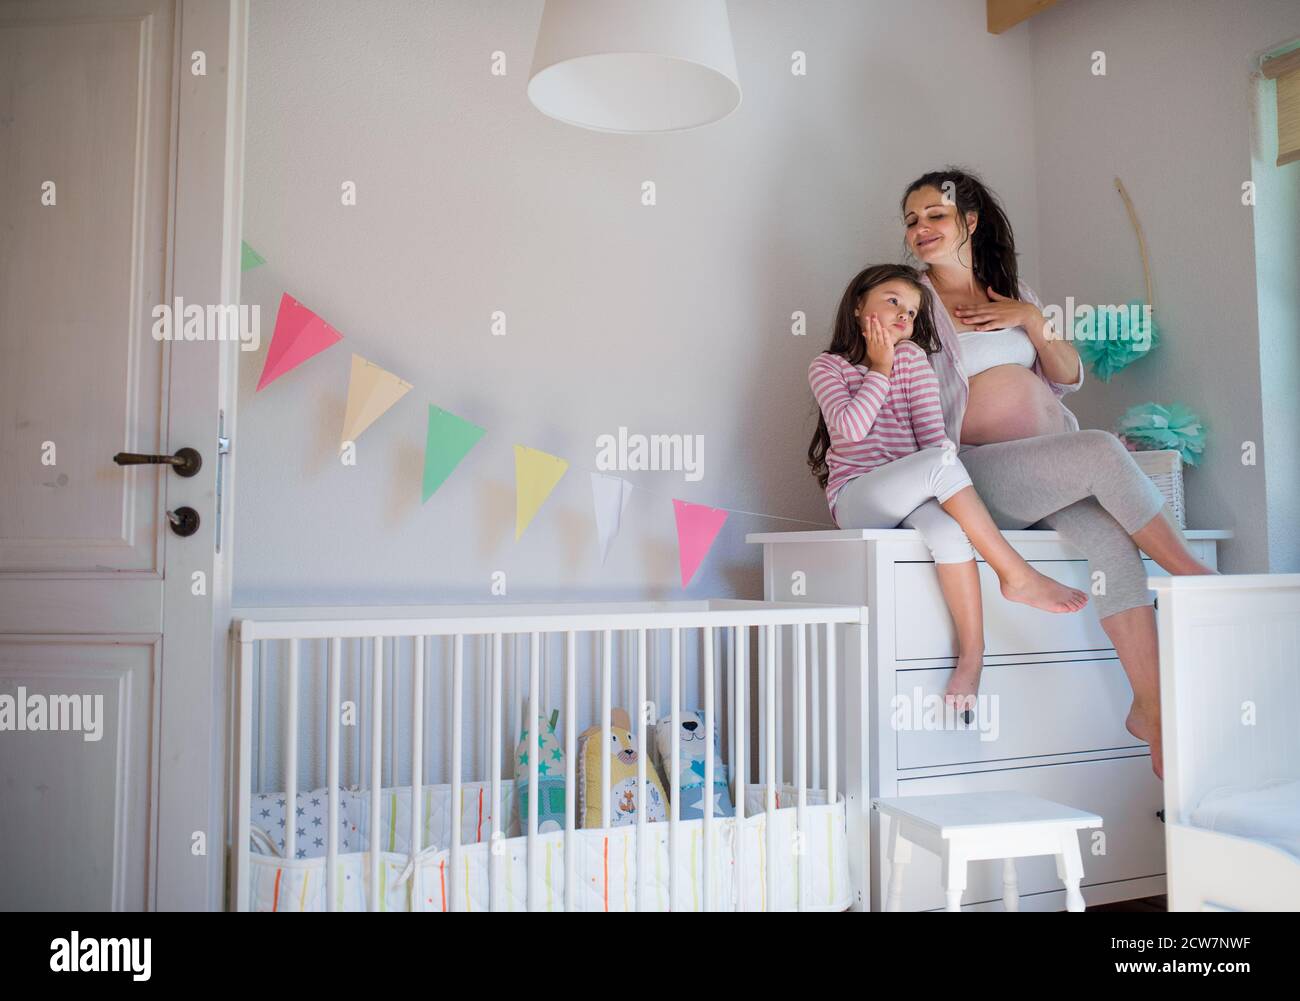 Portrait of pregnant woman with small daughter indoors at home, sitting on chest of drawers. Stock Photo